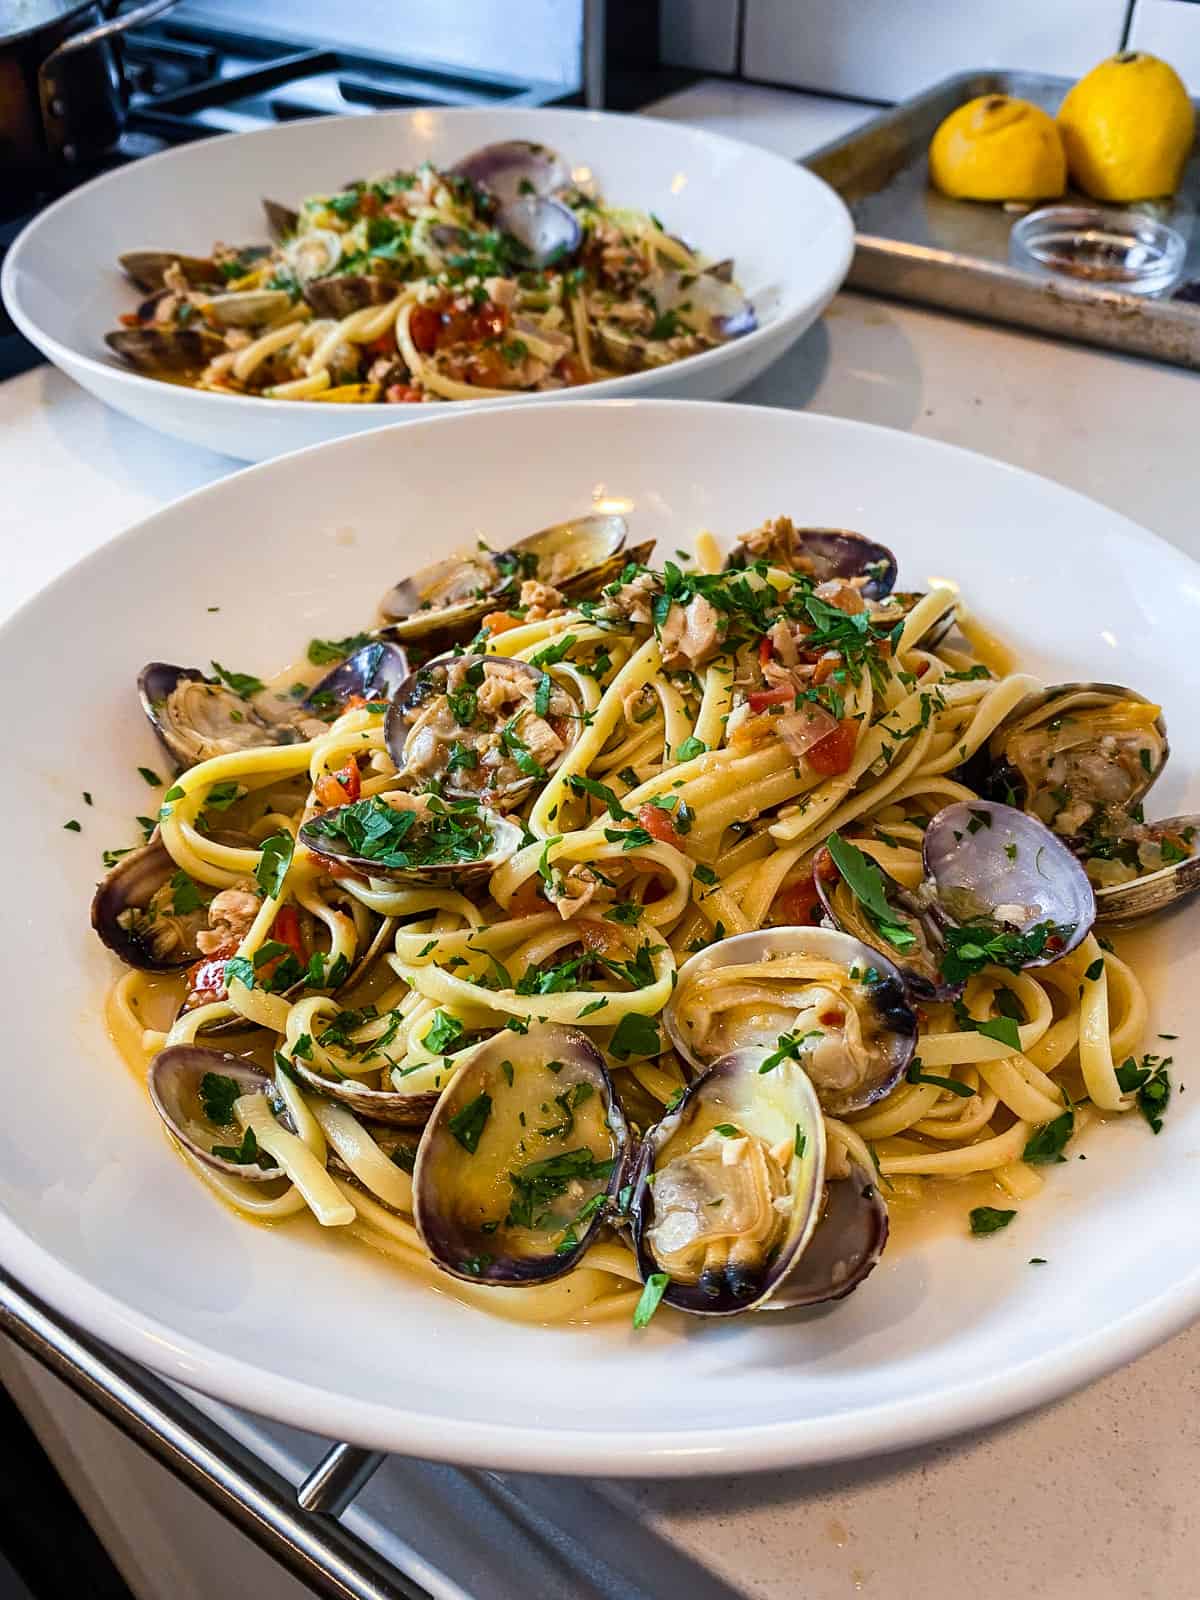 Serve the linguine and clams in wide bowls garnished with fresh parsley.